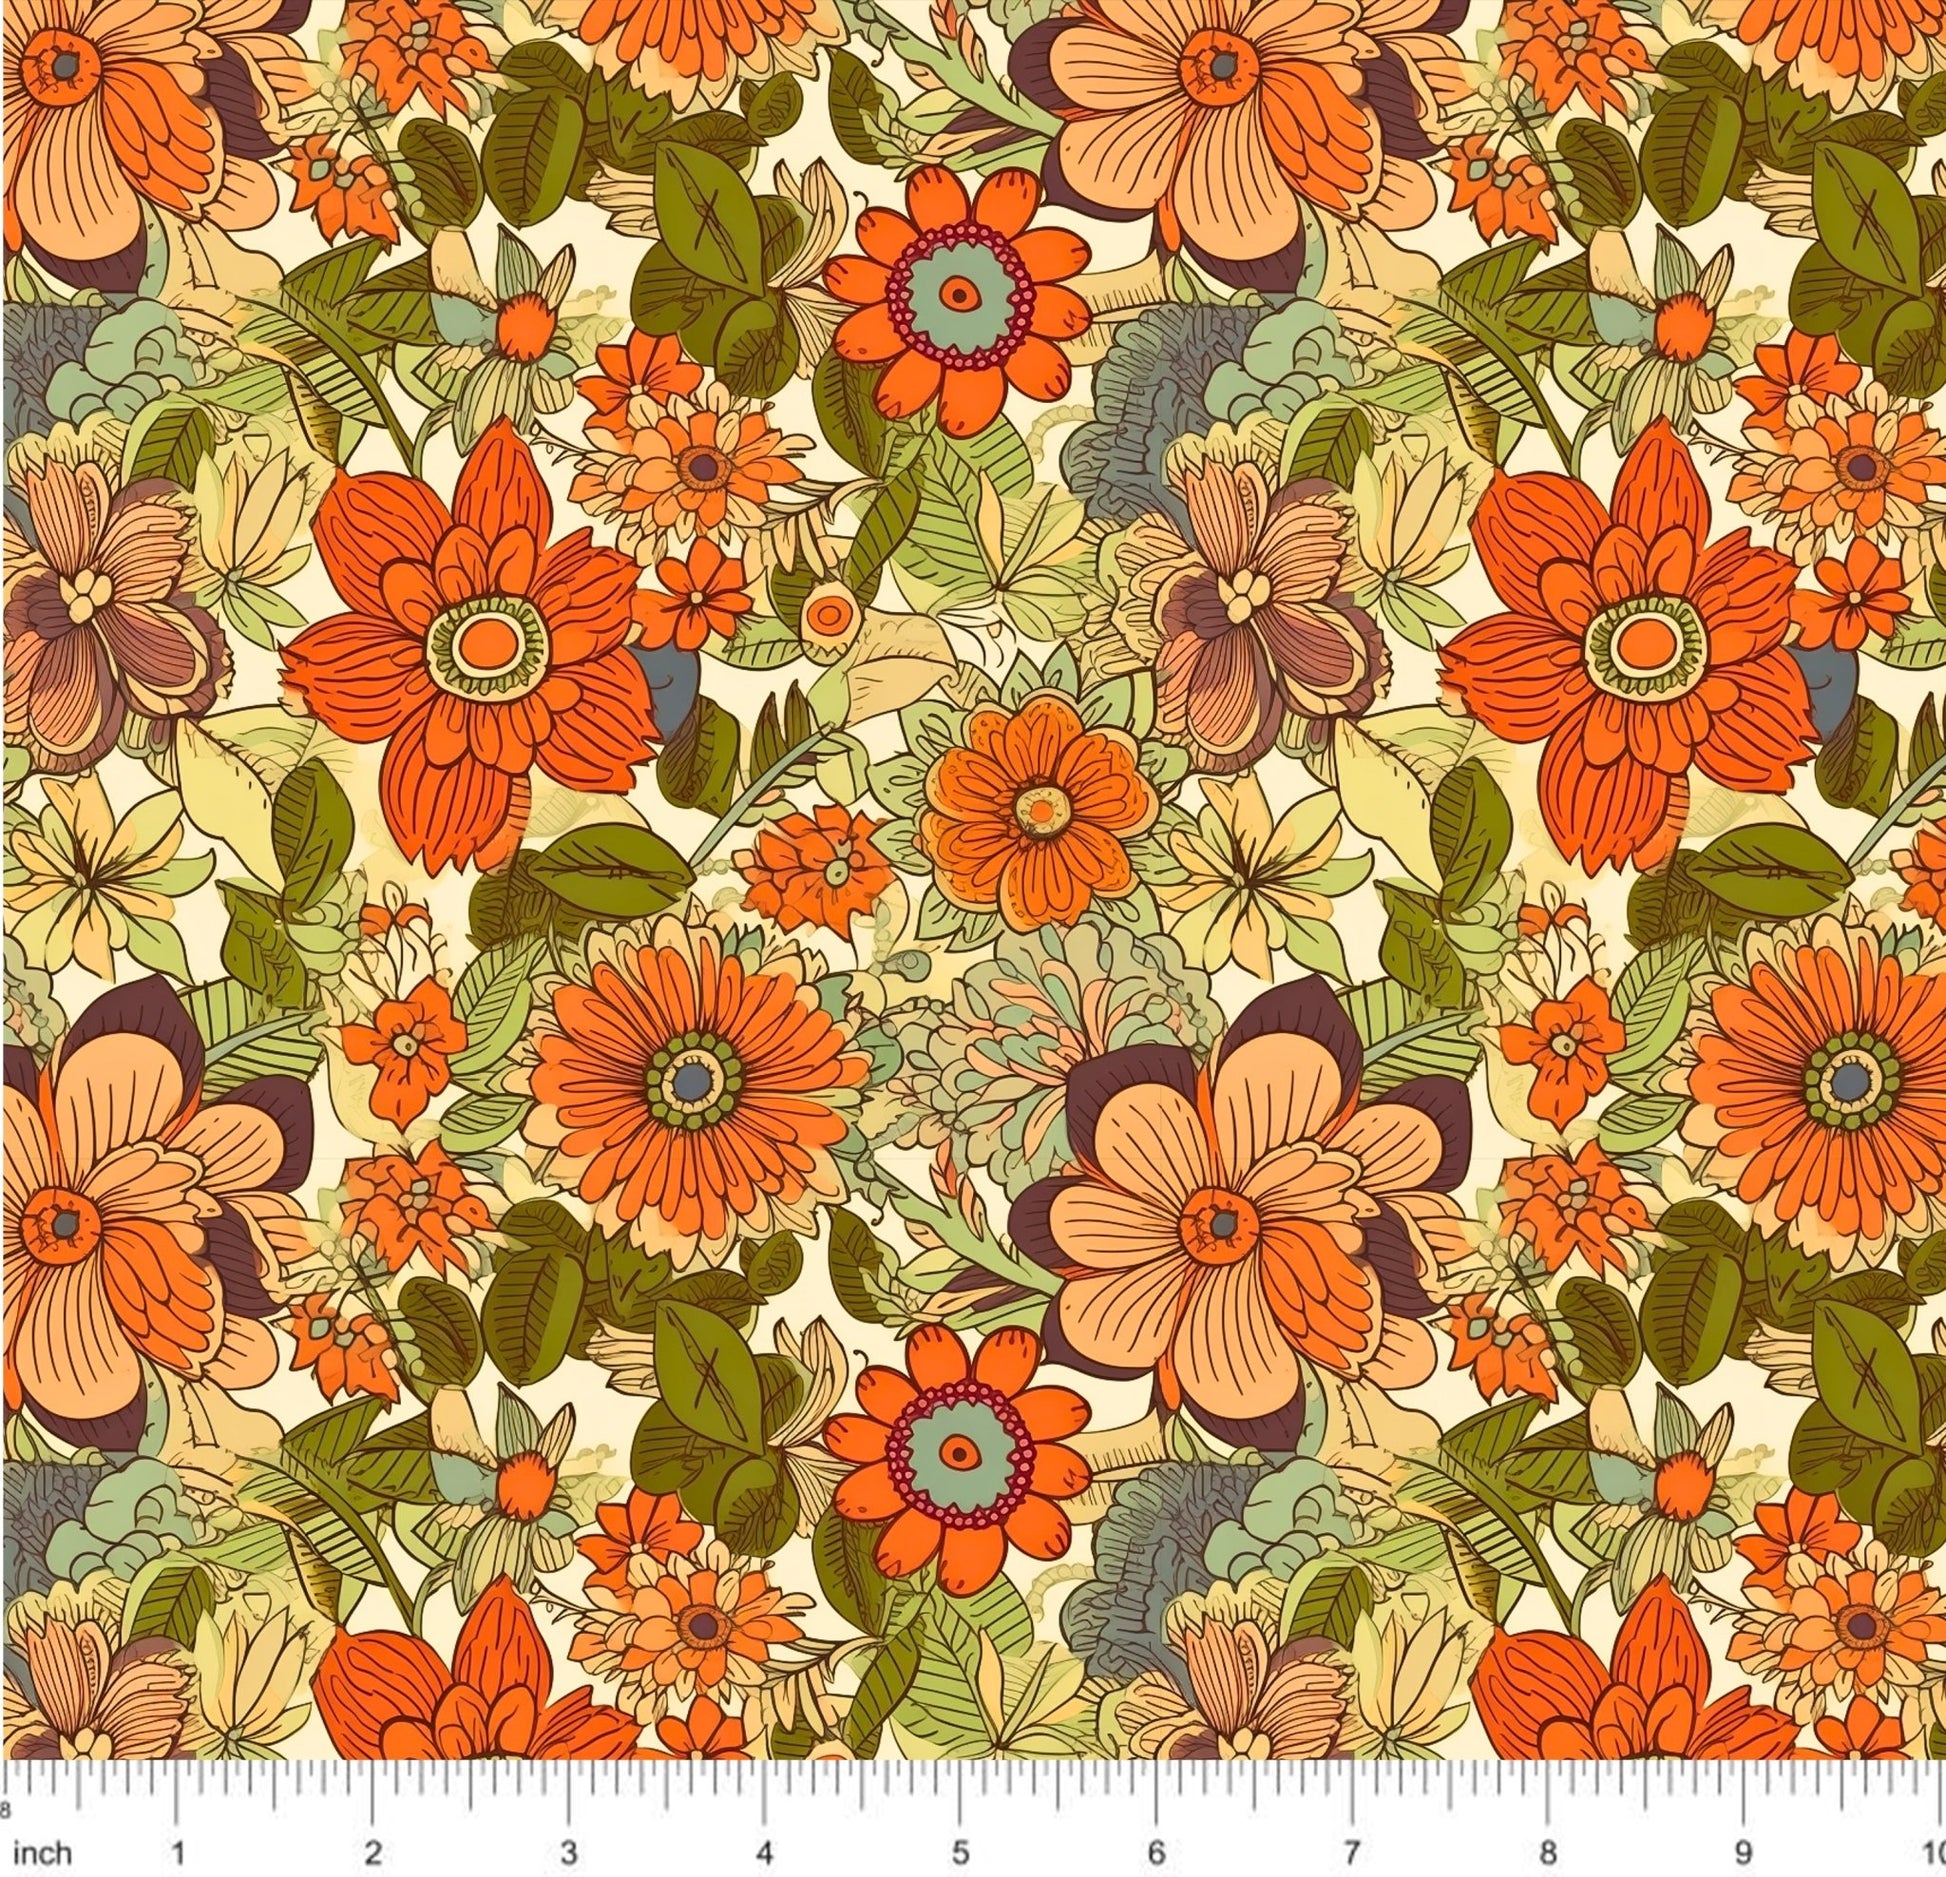 Bonnie's Boujee Designs -Vintage Autumn Floral - Little Rhody Sewing Co.